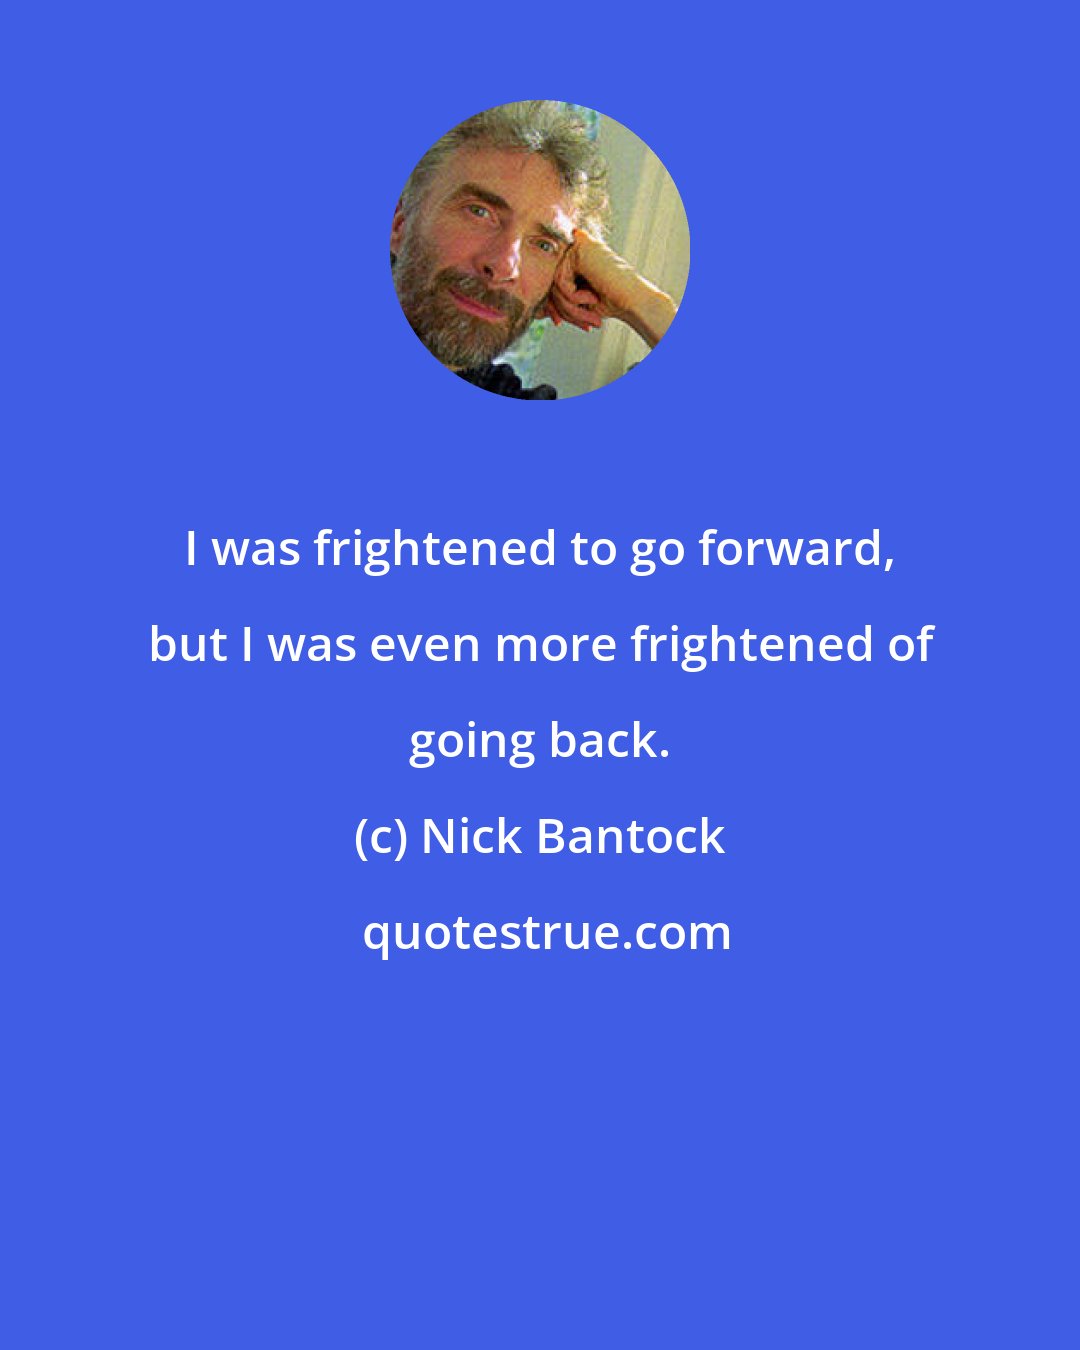 Nick Bantock: I was frightened to go forward, but I was even more frightened of going back.